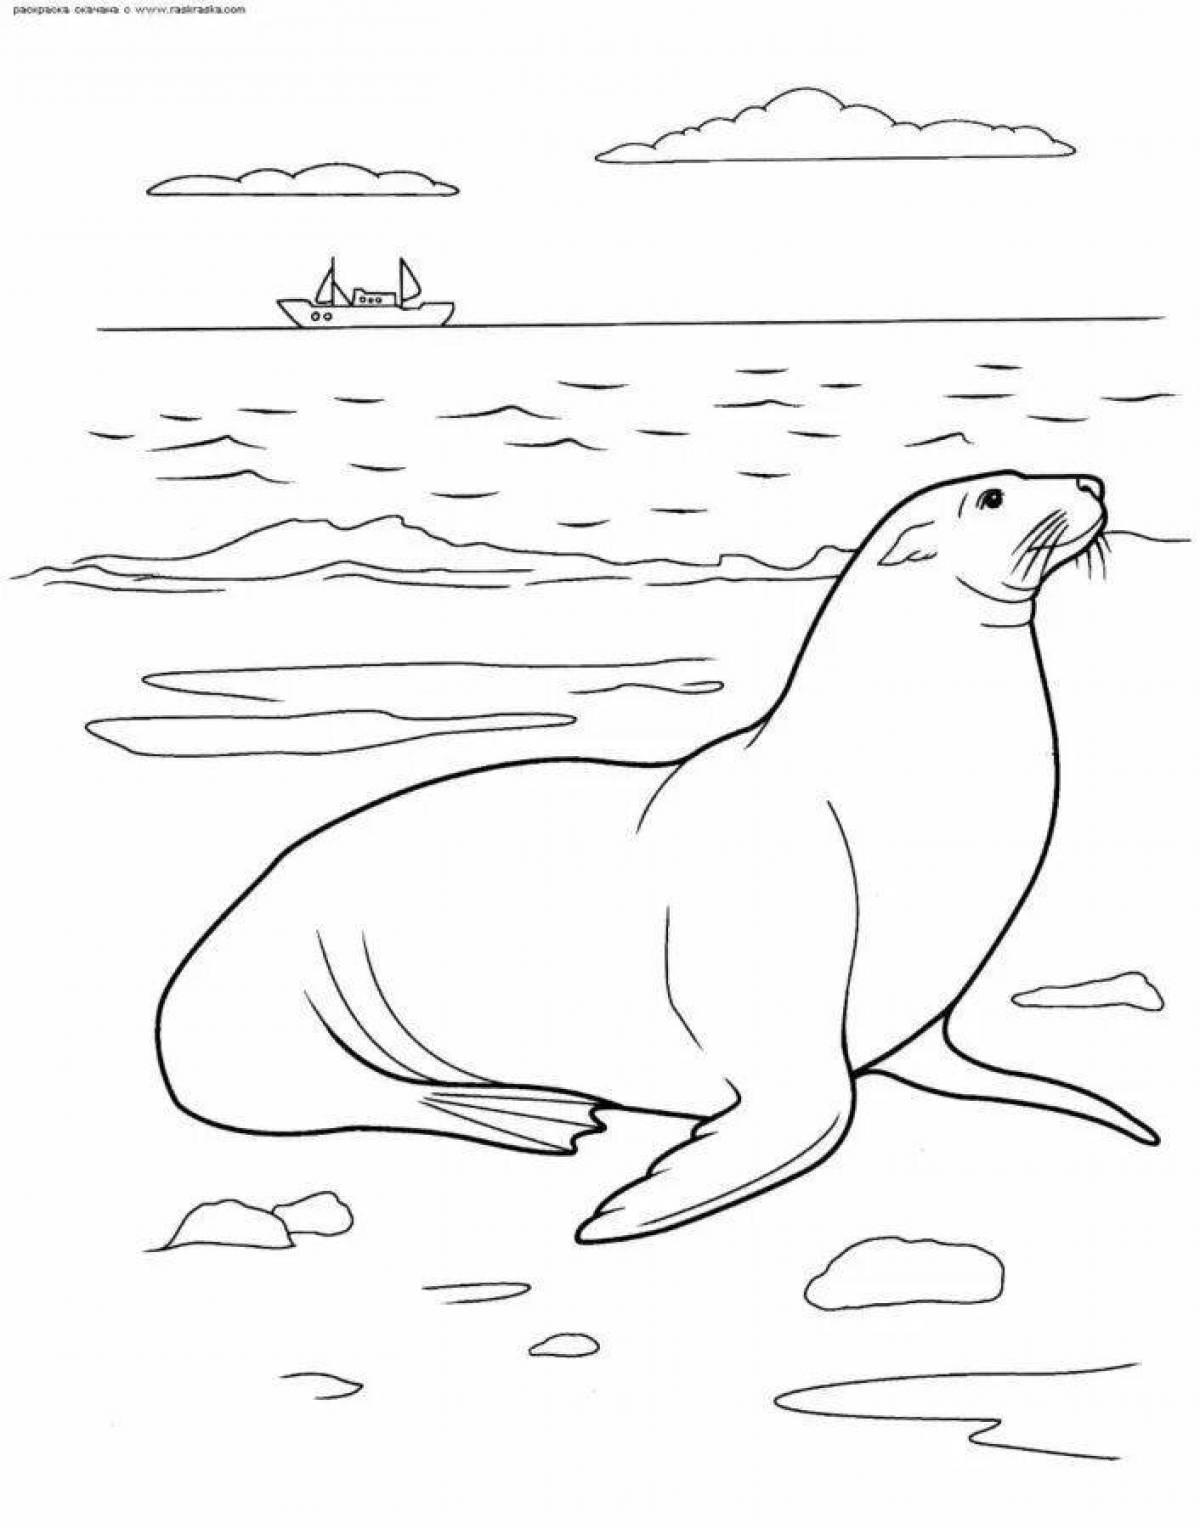 Coloring page mysterious sakhalin